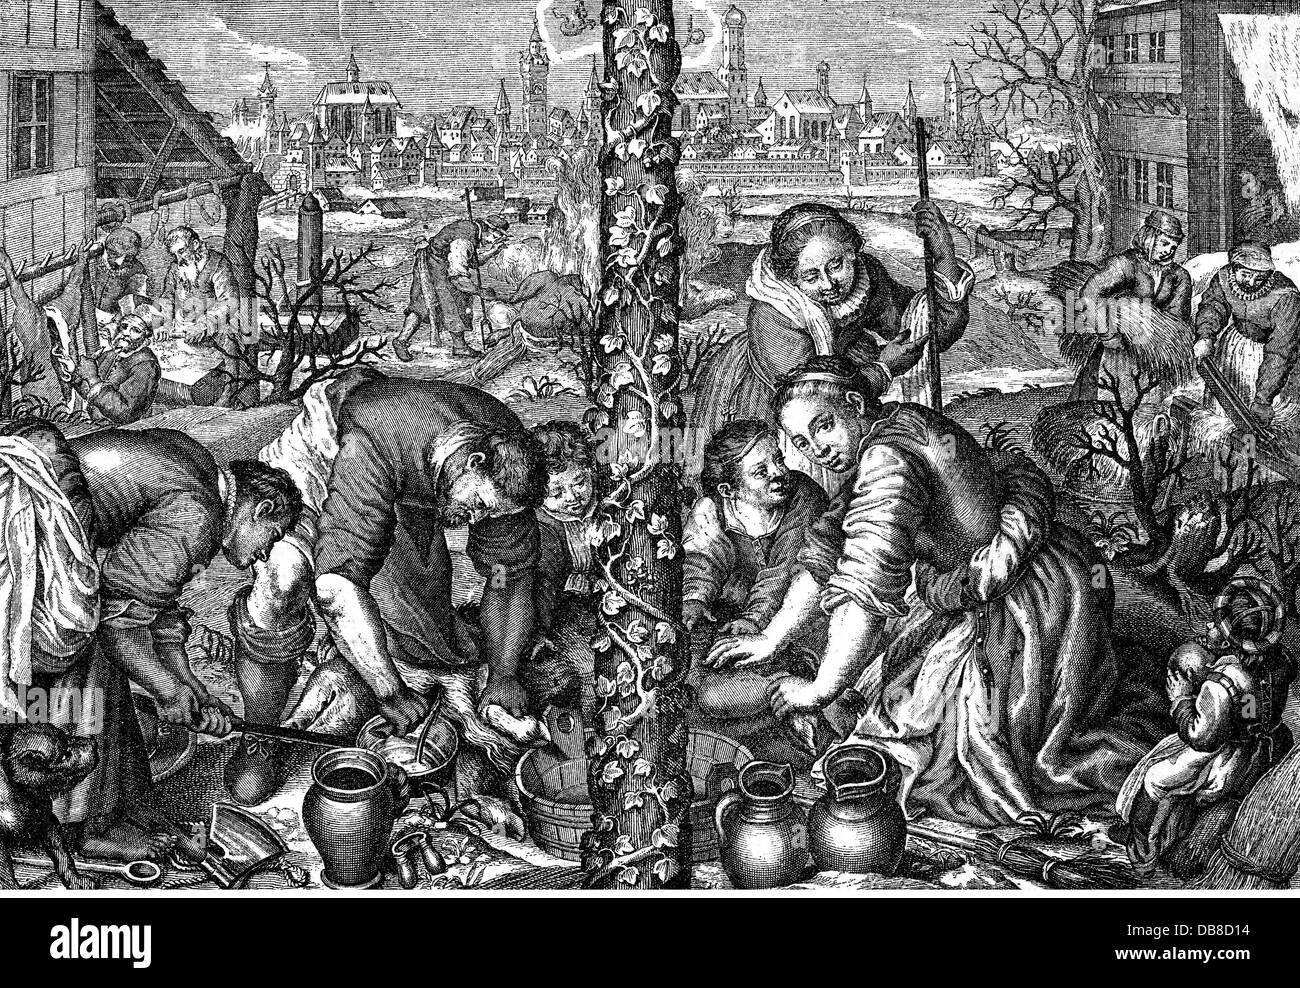 allegories, 'December', peasants slaughtering a pig, design by Peter Candid, after engraving by Amling, 17th century, wood engraving, 19th century, Additional-Rights-Clearences-Not Available Stock Photo